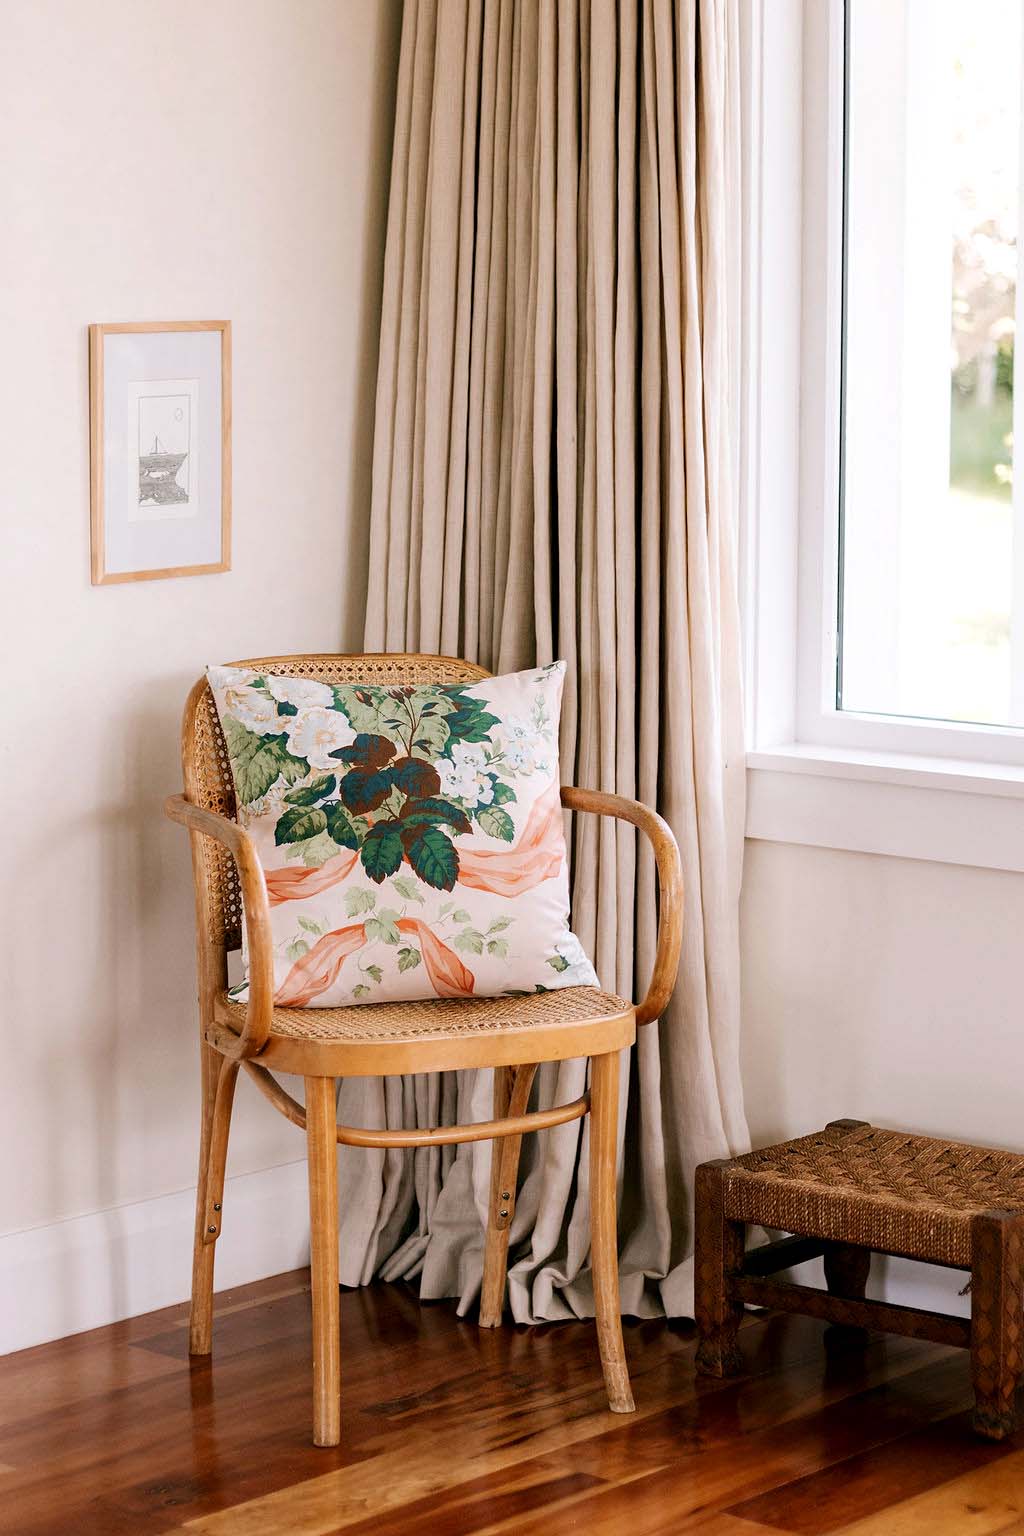 A wooden chair with a colourful The Brim cushion in the corner of a room